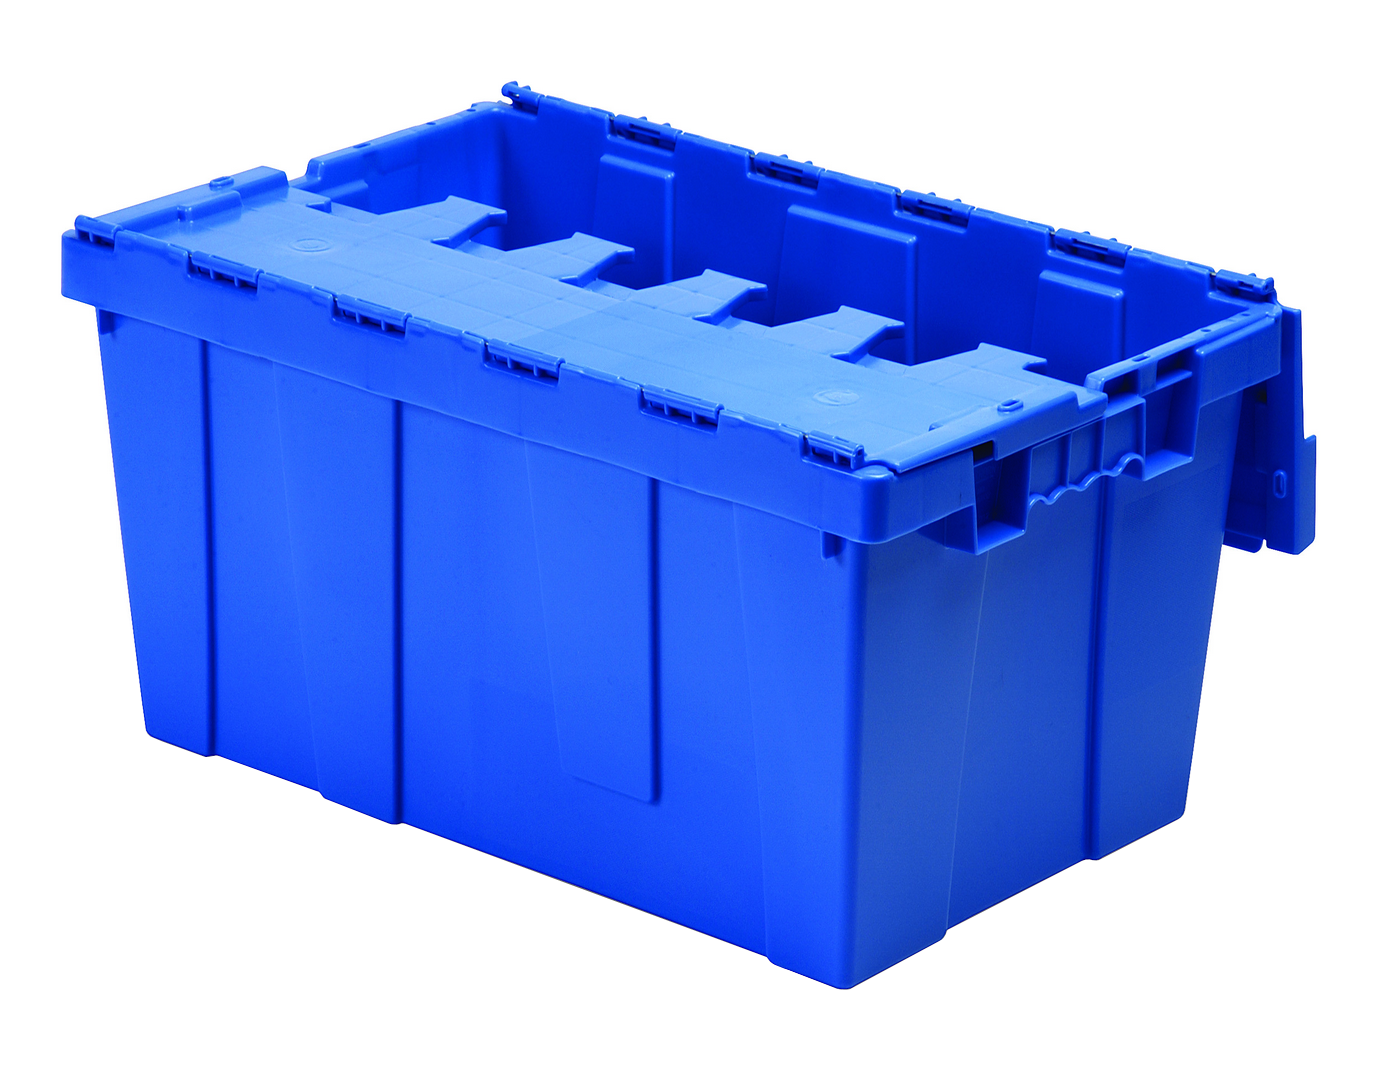 25 x 15 x 13 – Handheld Attached Lid Container